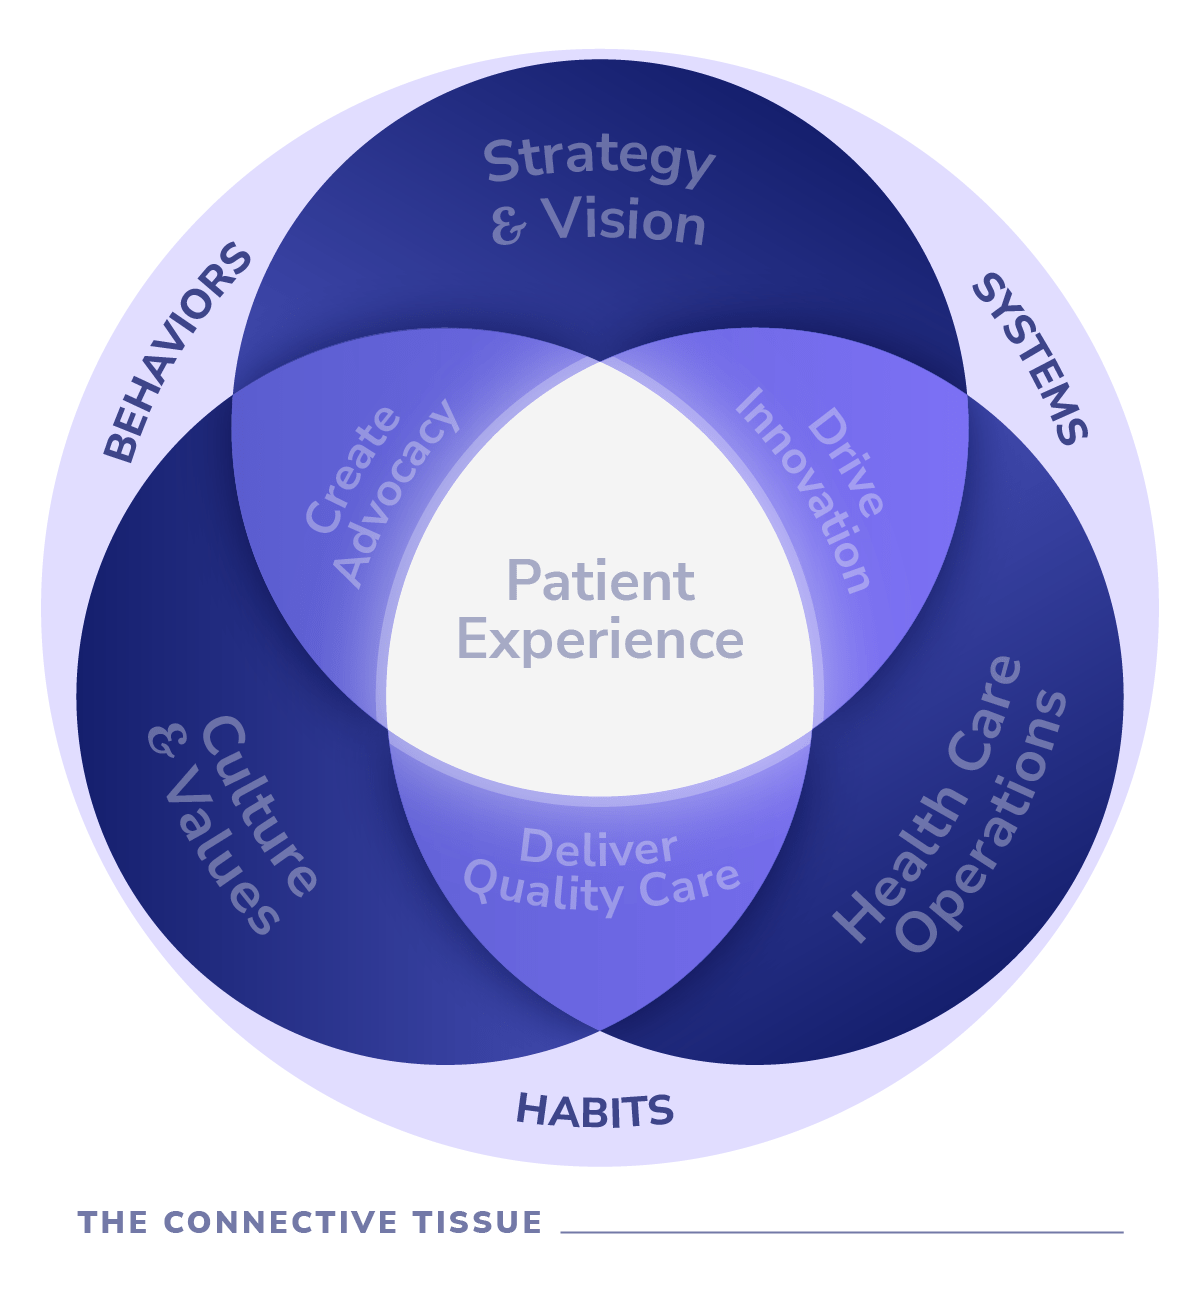 Patient-Centric Brand Model – The Connective Tissue